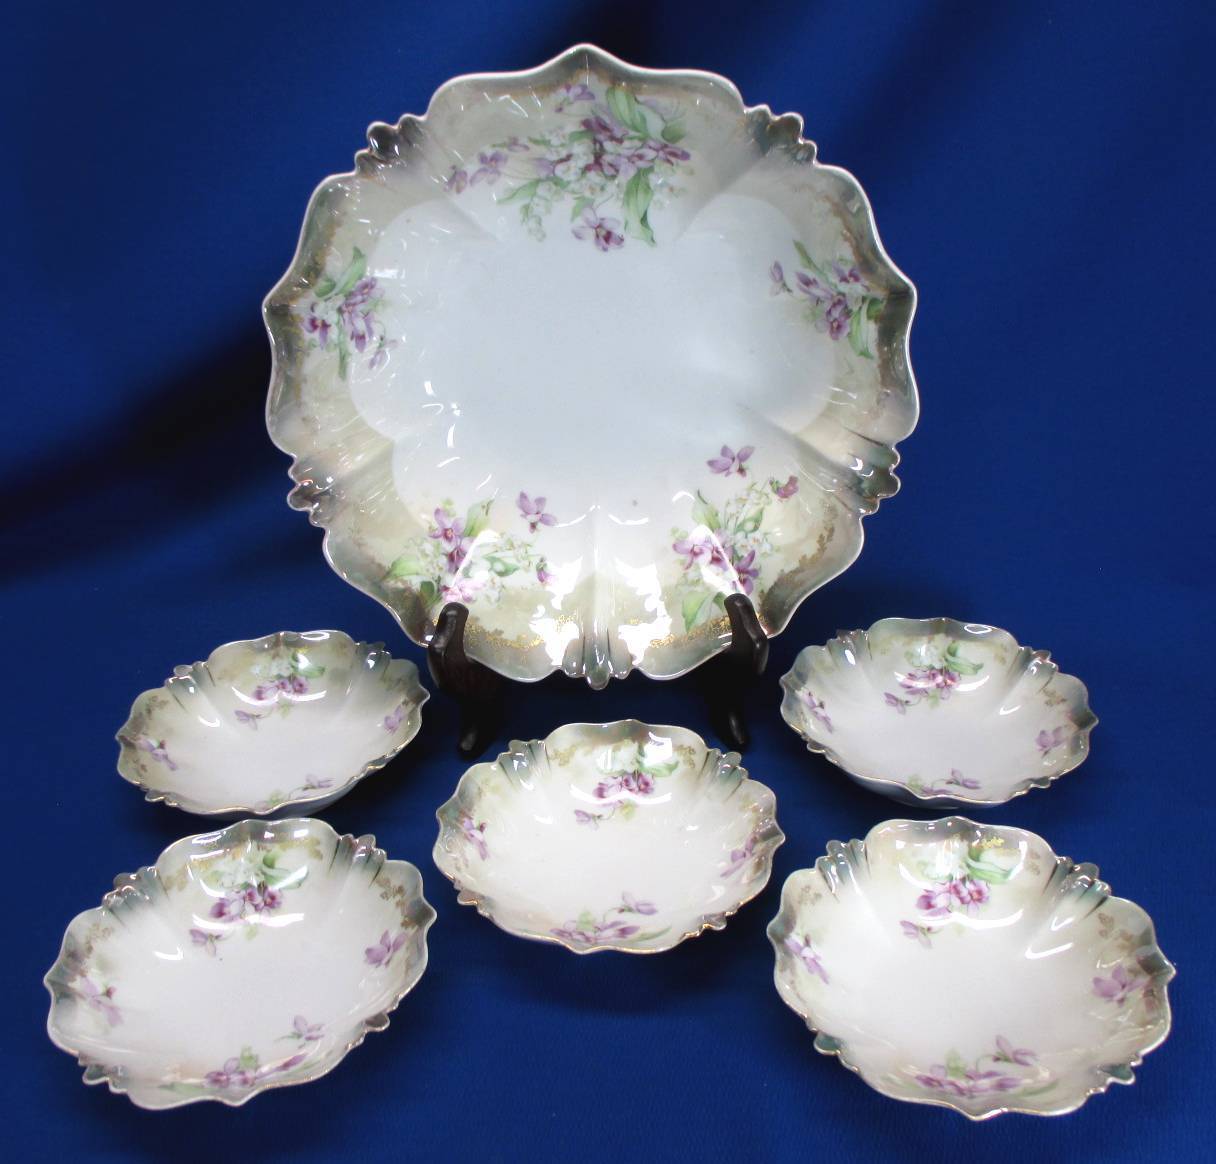 ANTIQUE RS PRUSSIA 6 PIECE BERRY SET IN VIOLETS PATTERN